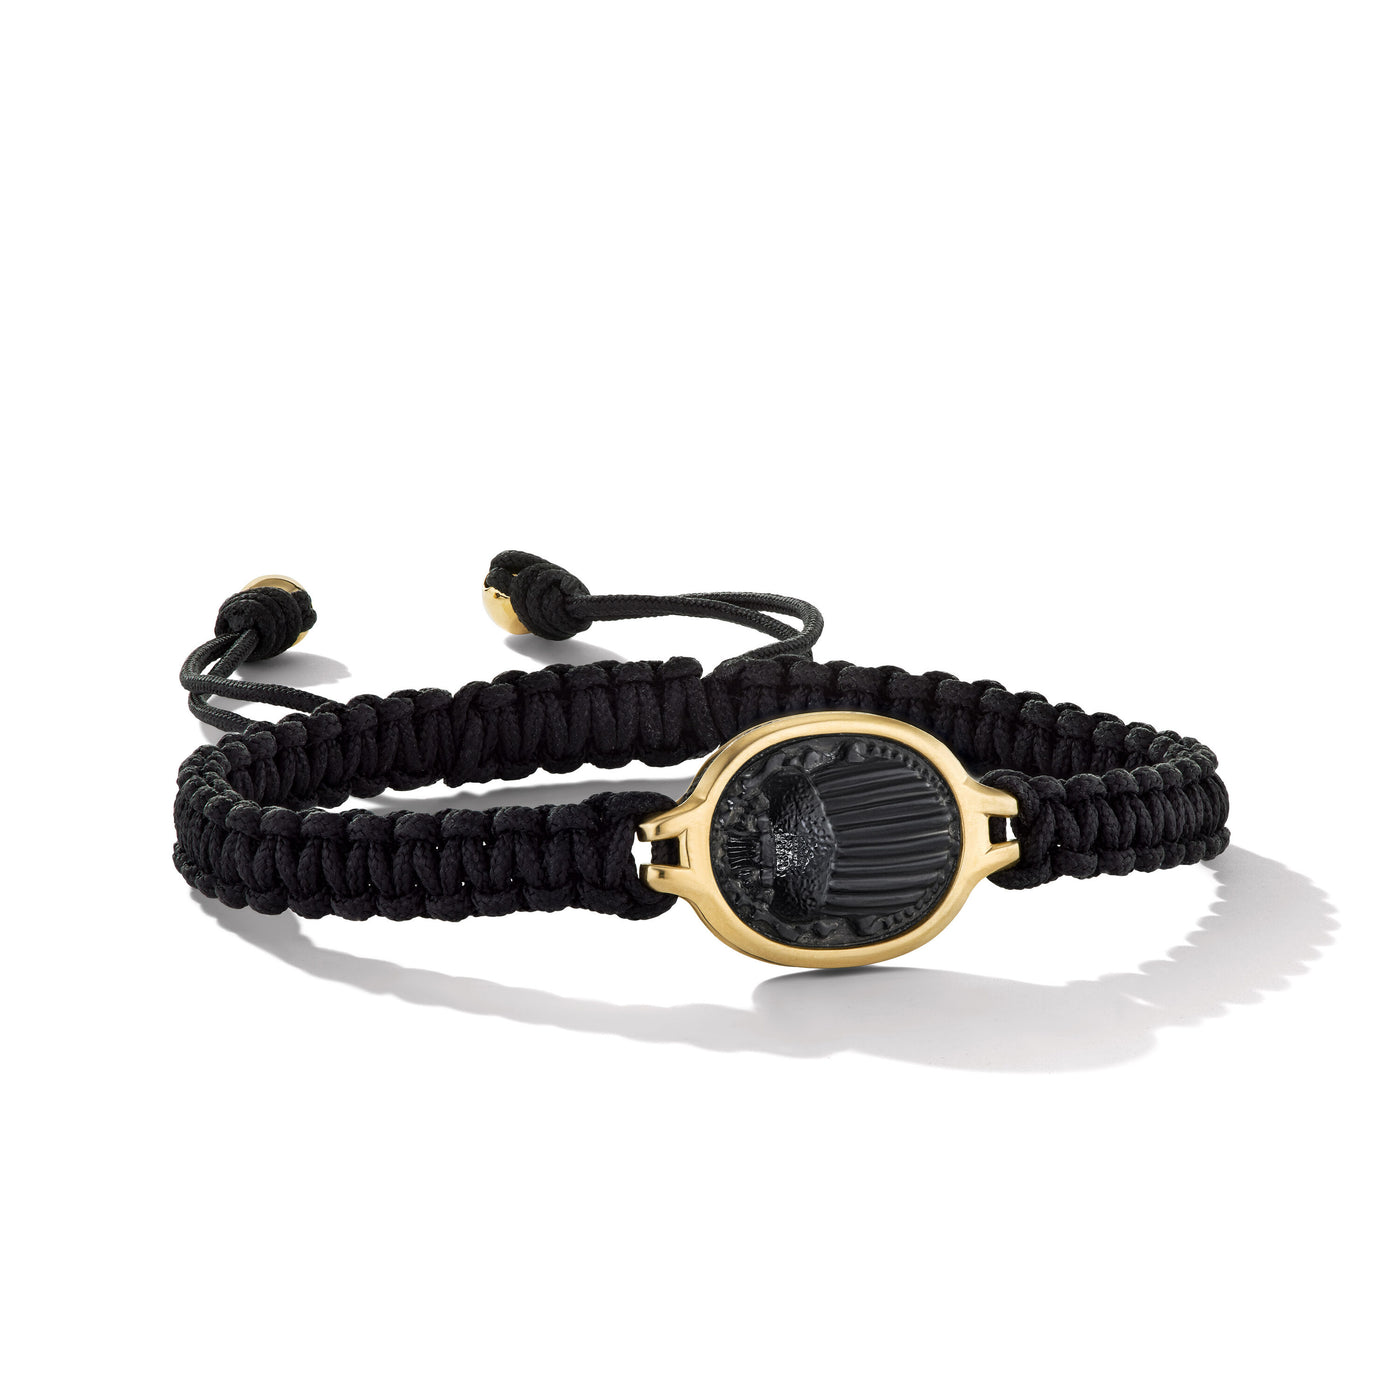 Cairo Scarab Woven Bracelet in Black Nylon with Black Onyx and 18K Yellow Gold\, 6mm